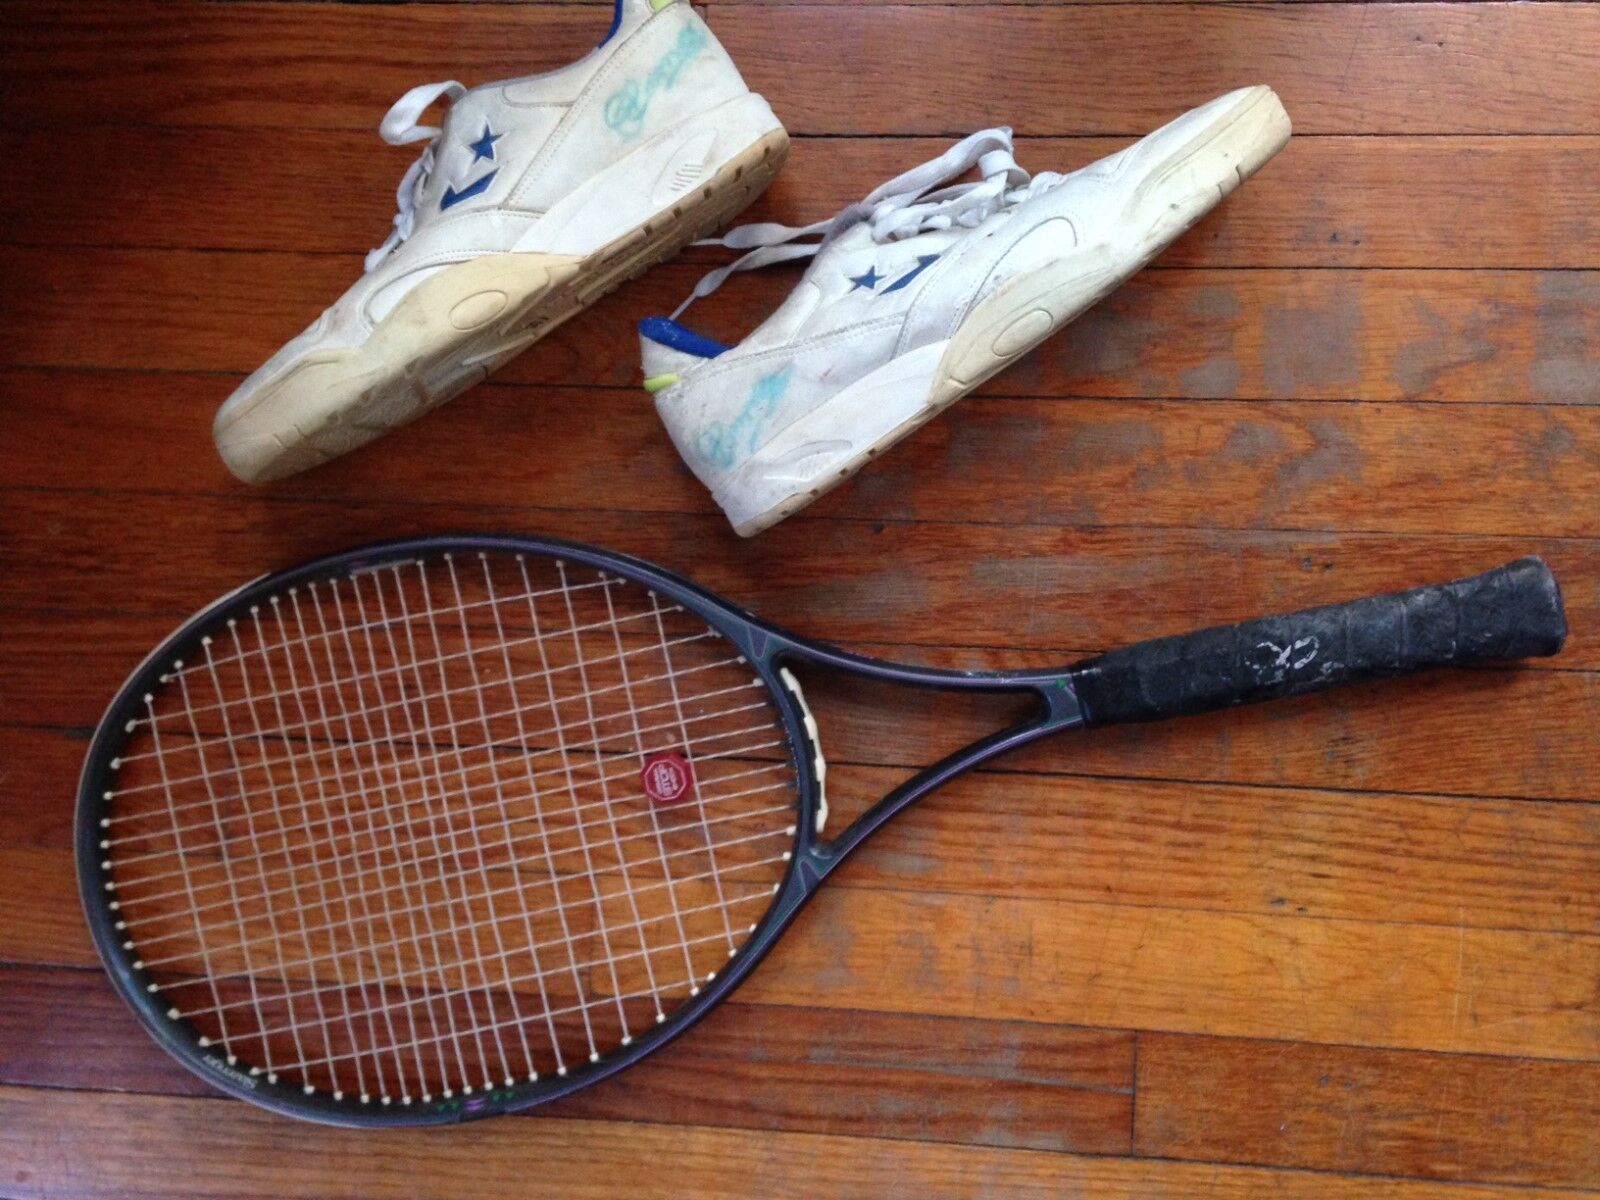 C. 1990'S JIMMY CONNORS SIGNED GAME WORN SNEAKERS, U.S. OPEN BALL,RACKET & COVER Без бренда - фотография #2